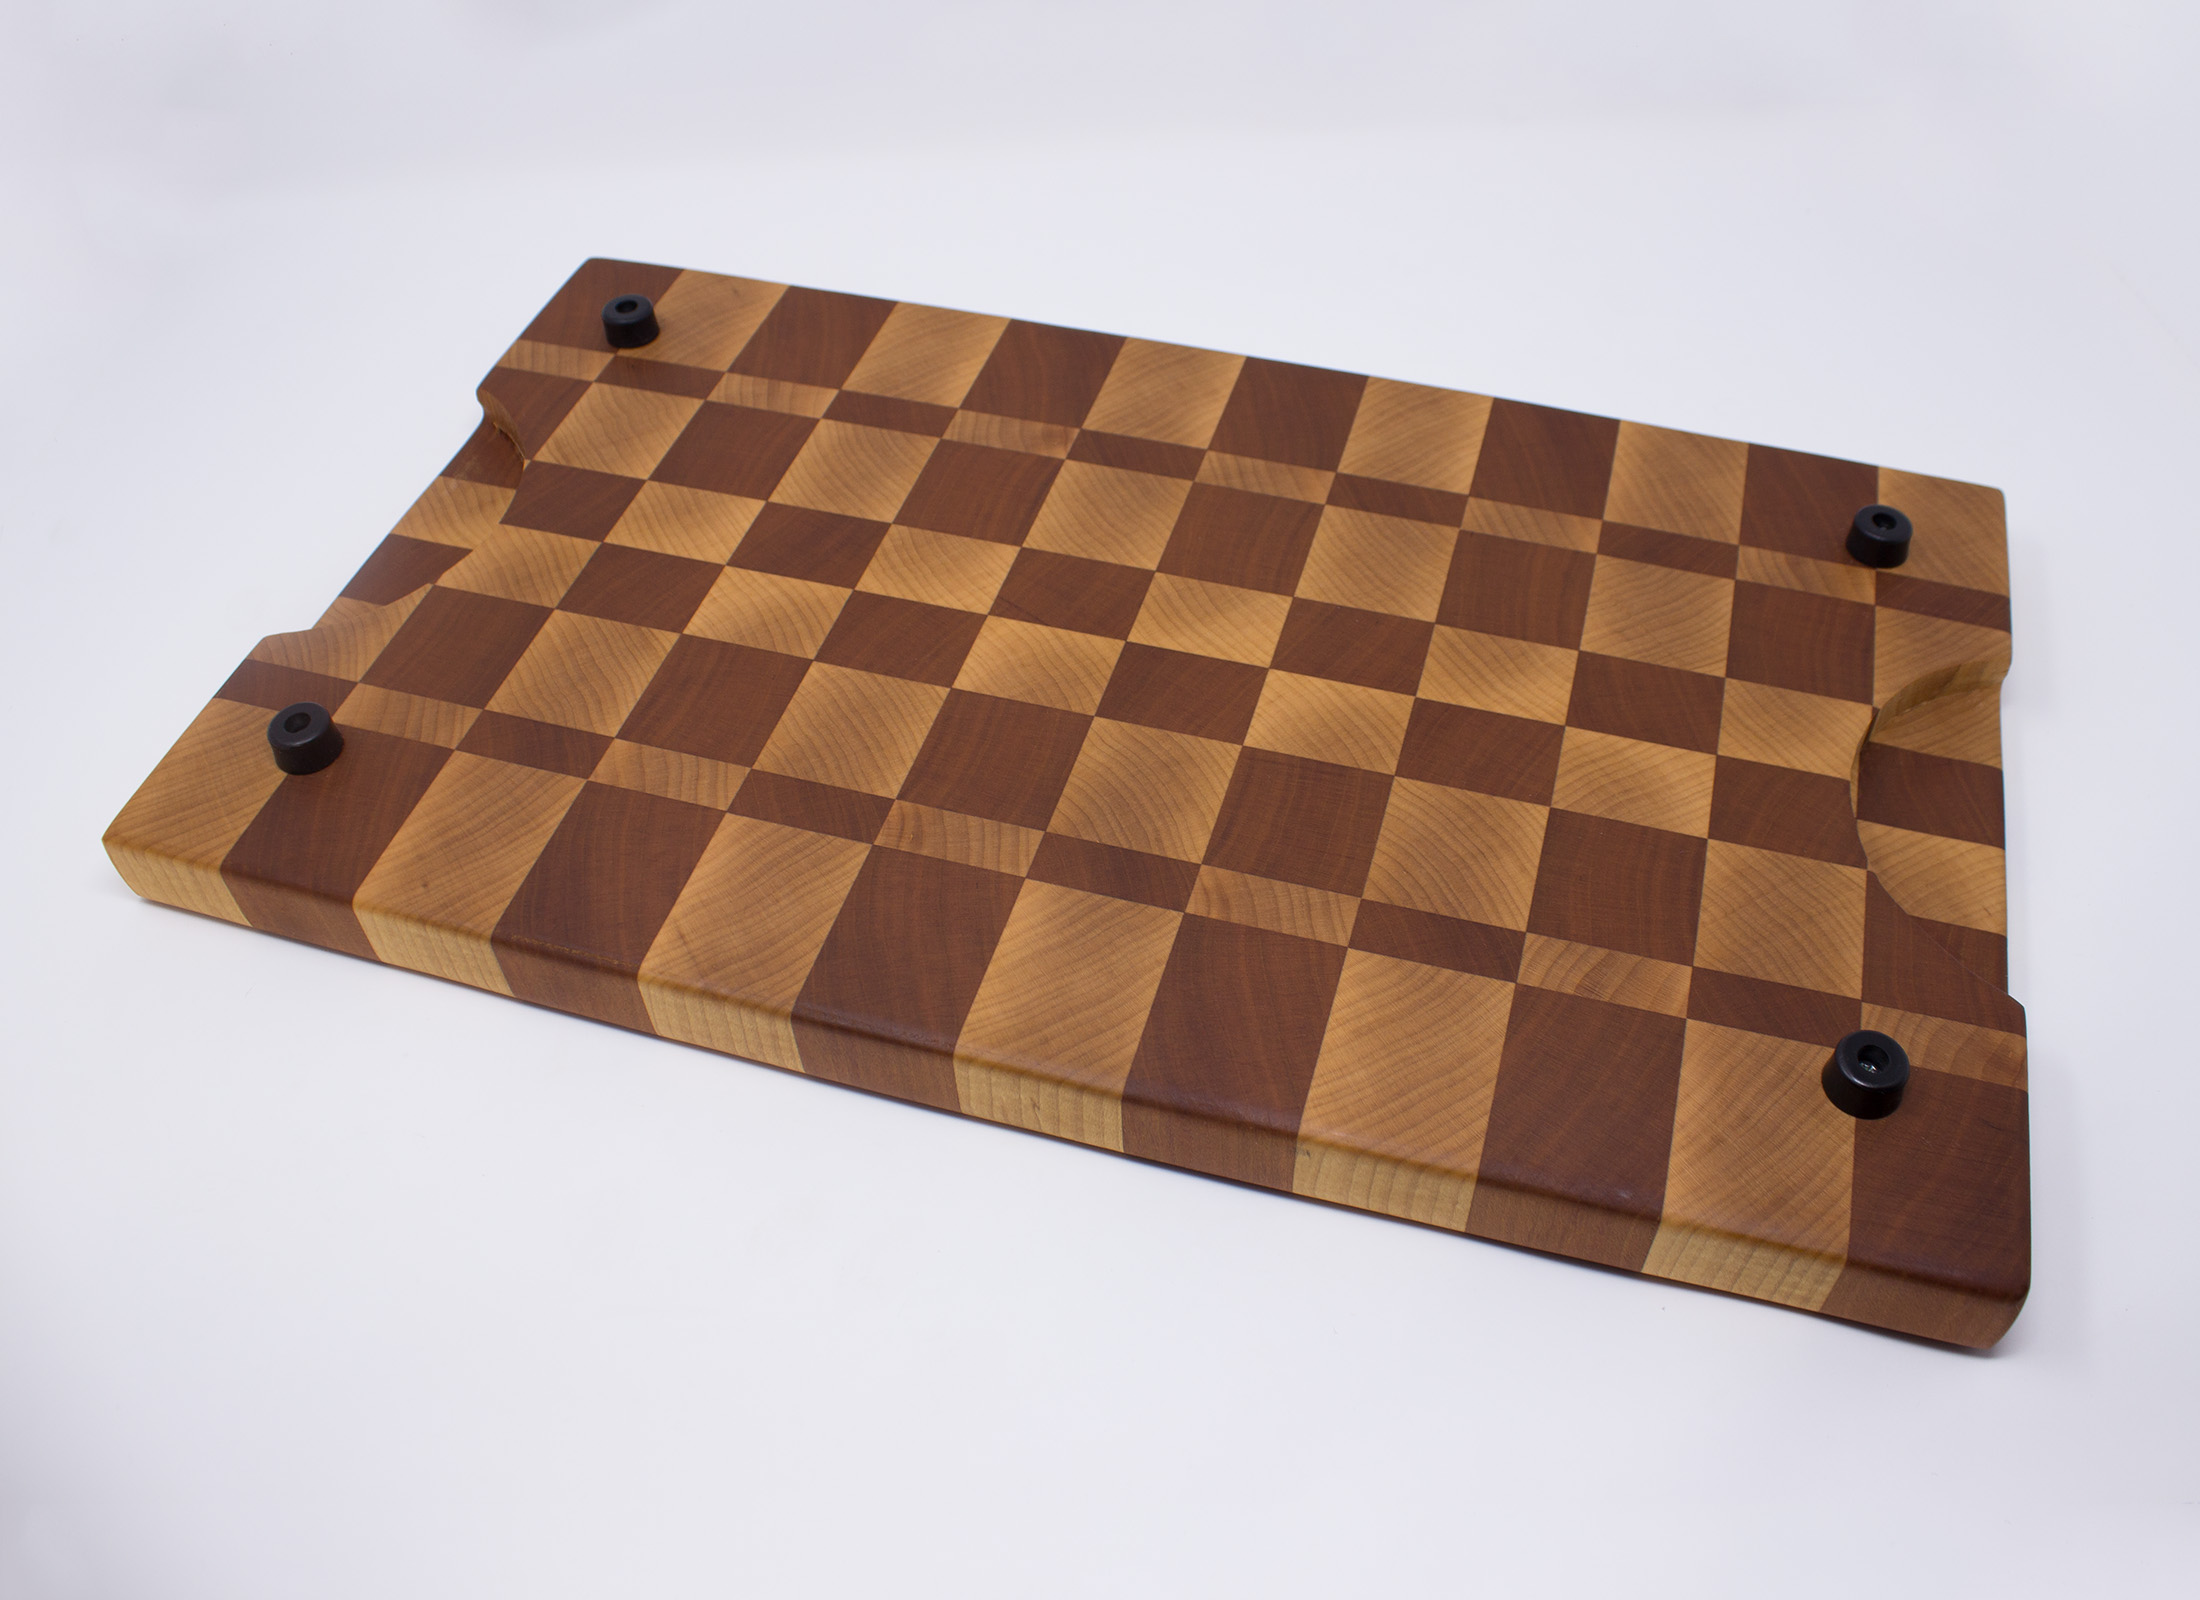 https://www.rockfordwoodcrafts.com/wp-content/uploads/Maple-and-Cherry-Checkerboard-End-Grain-Cutting-Board-Backside-with-Feet.jpg